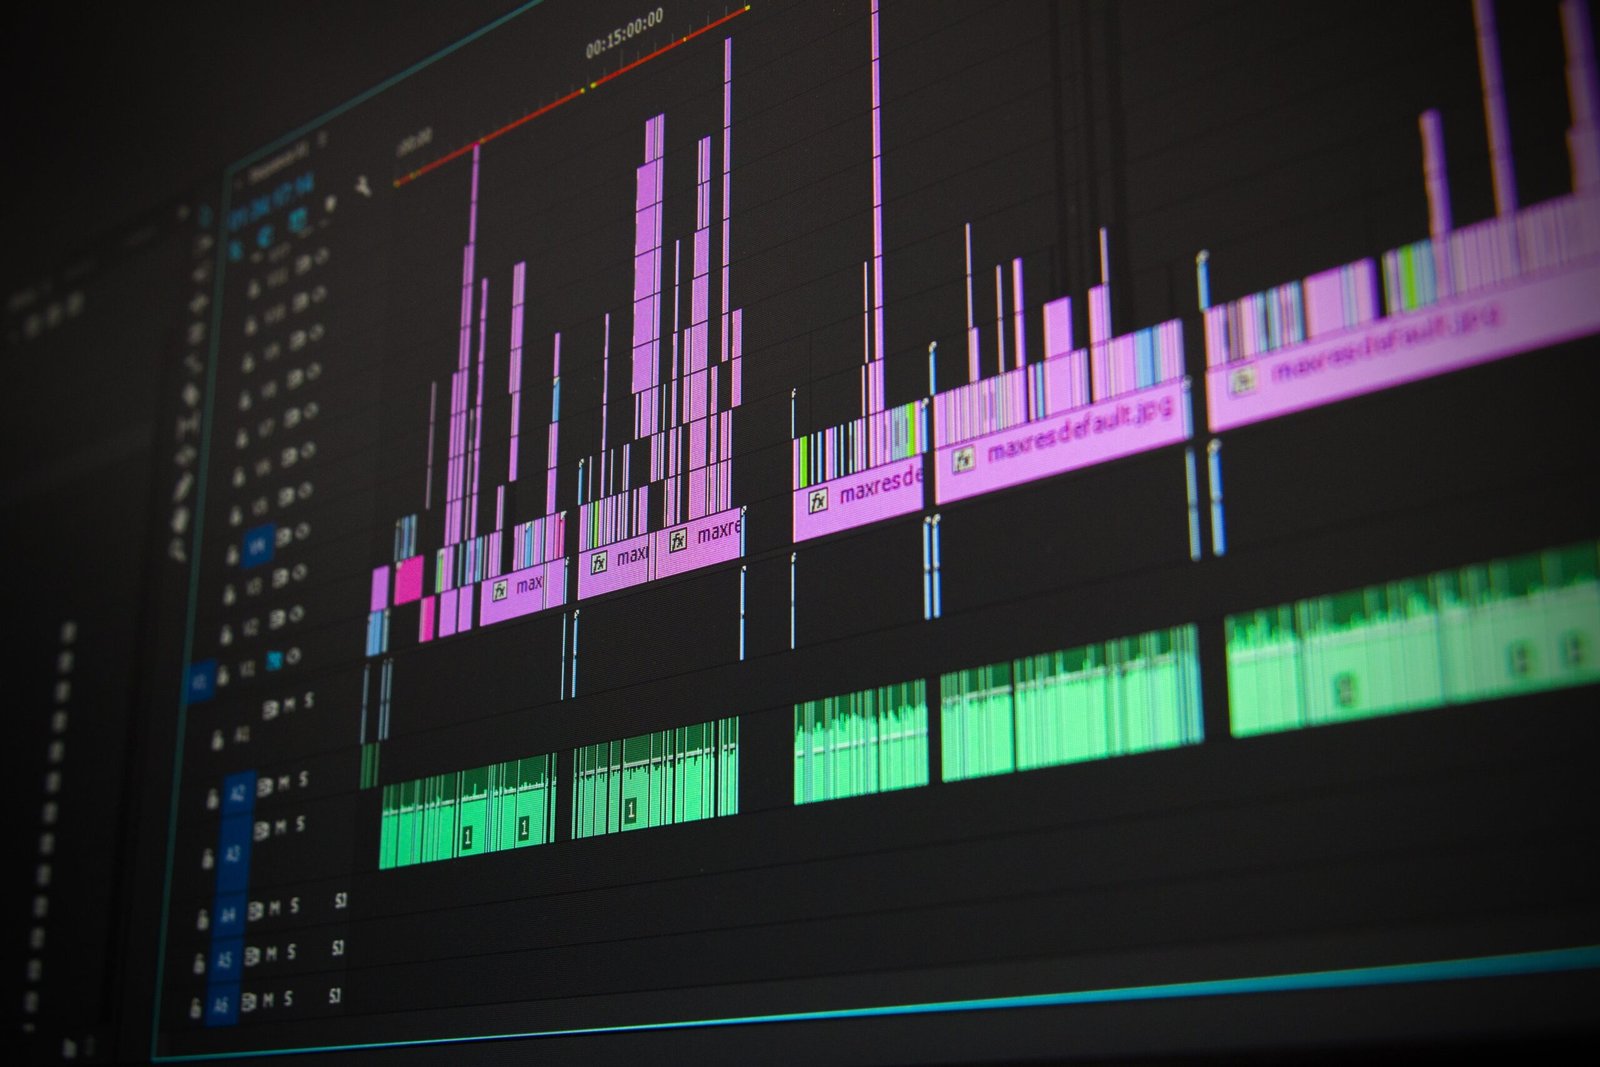 How to Export Videos in Premiere Pro: A Step-by-Step Guide